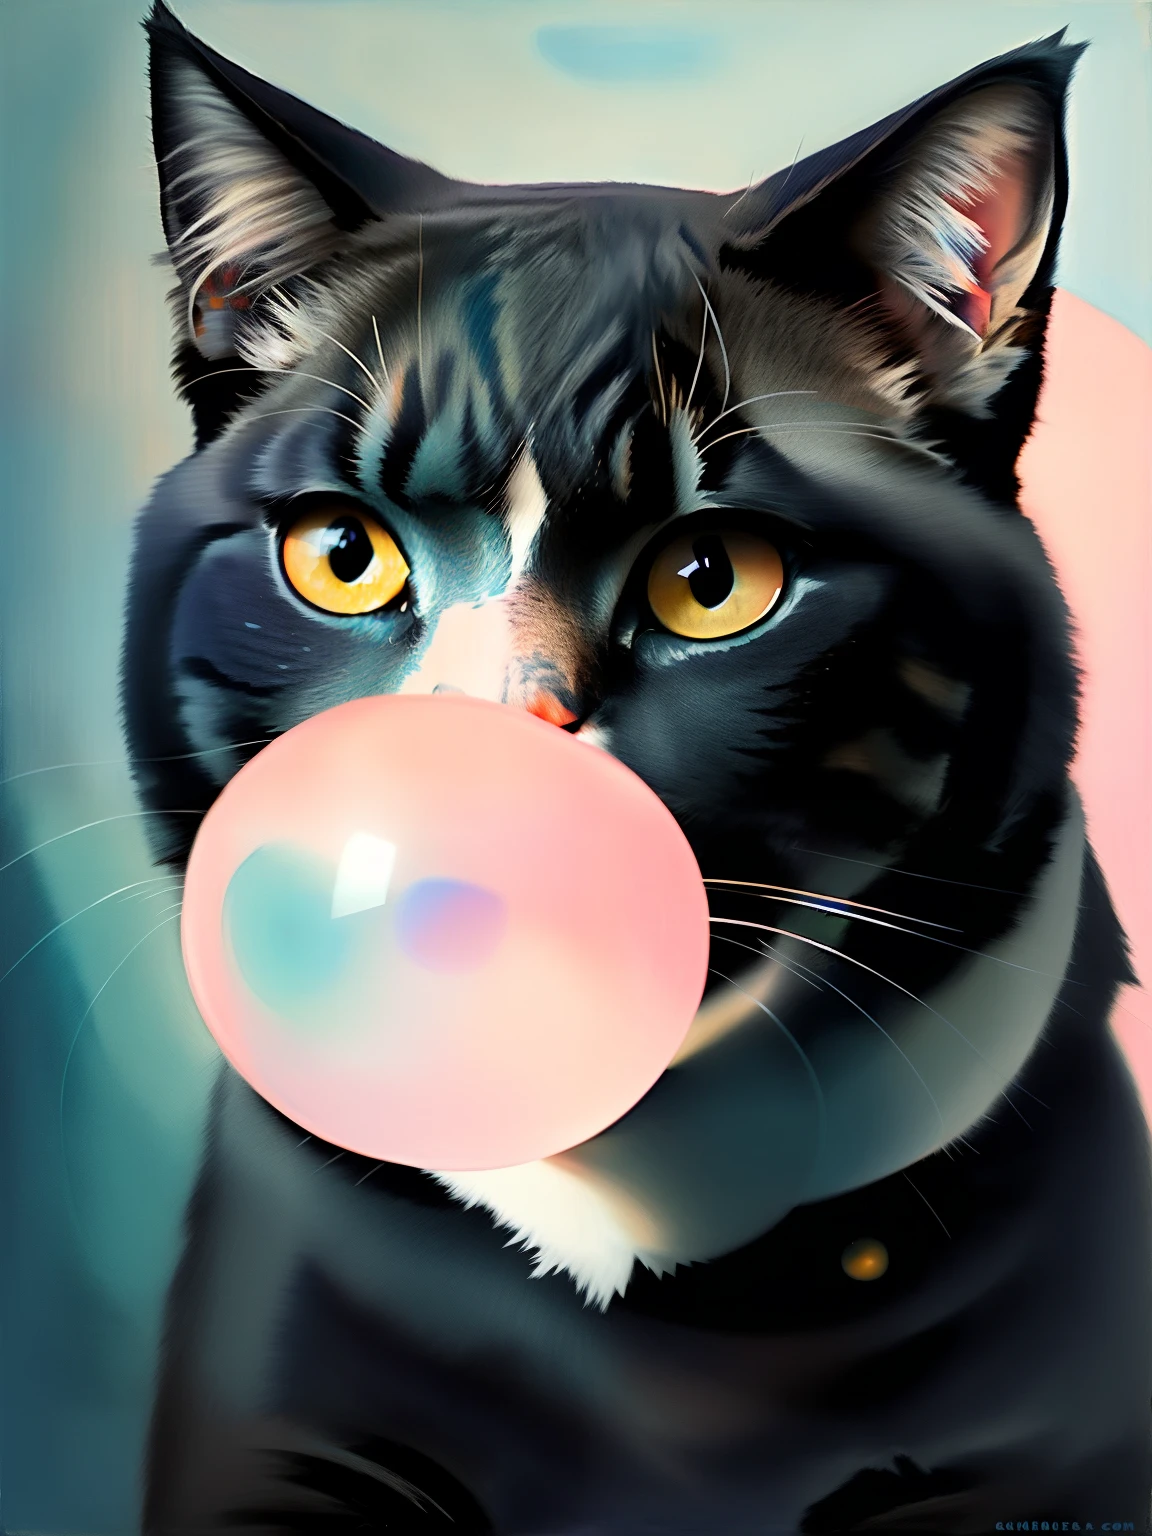 painting in the style, of a cat , navy_blue tones and pale highlights. blowing bubble gum, pink bubble gum 